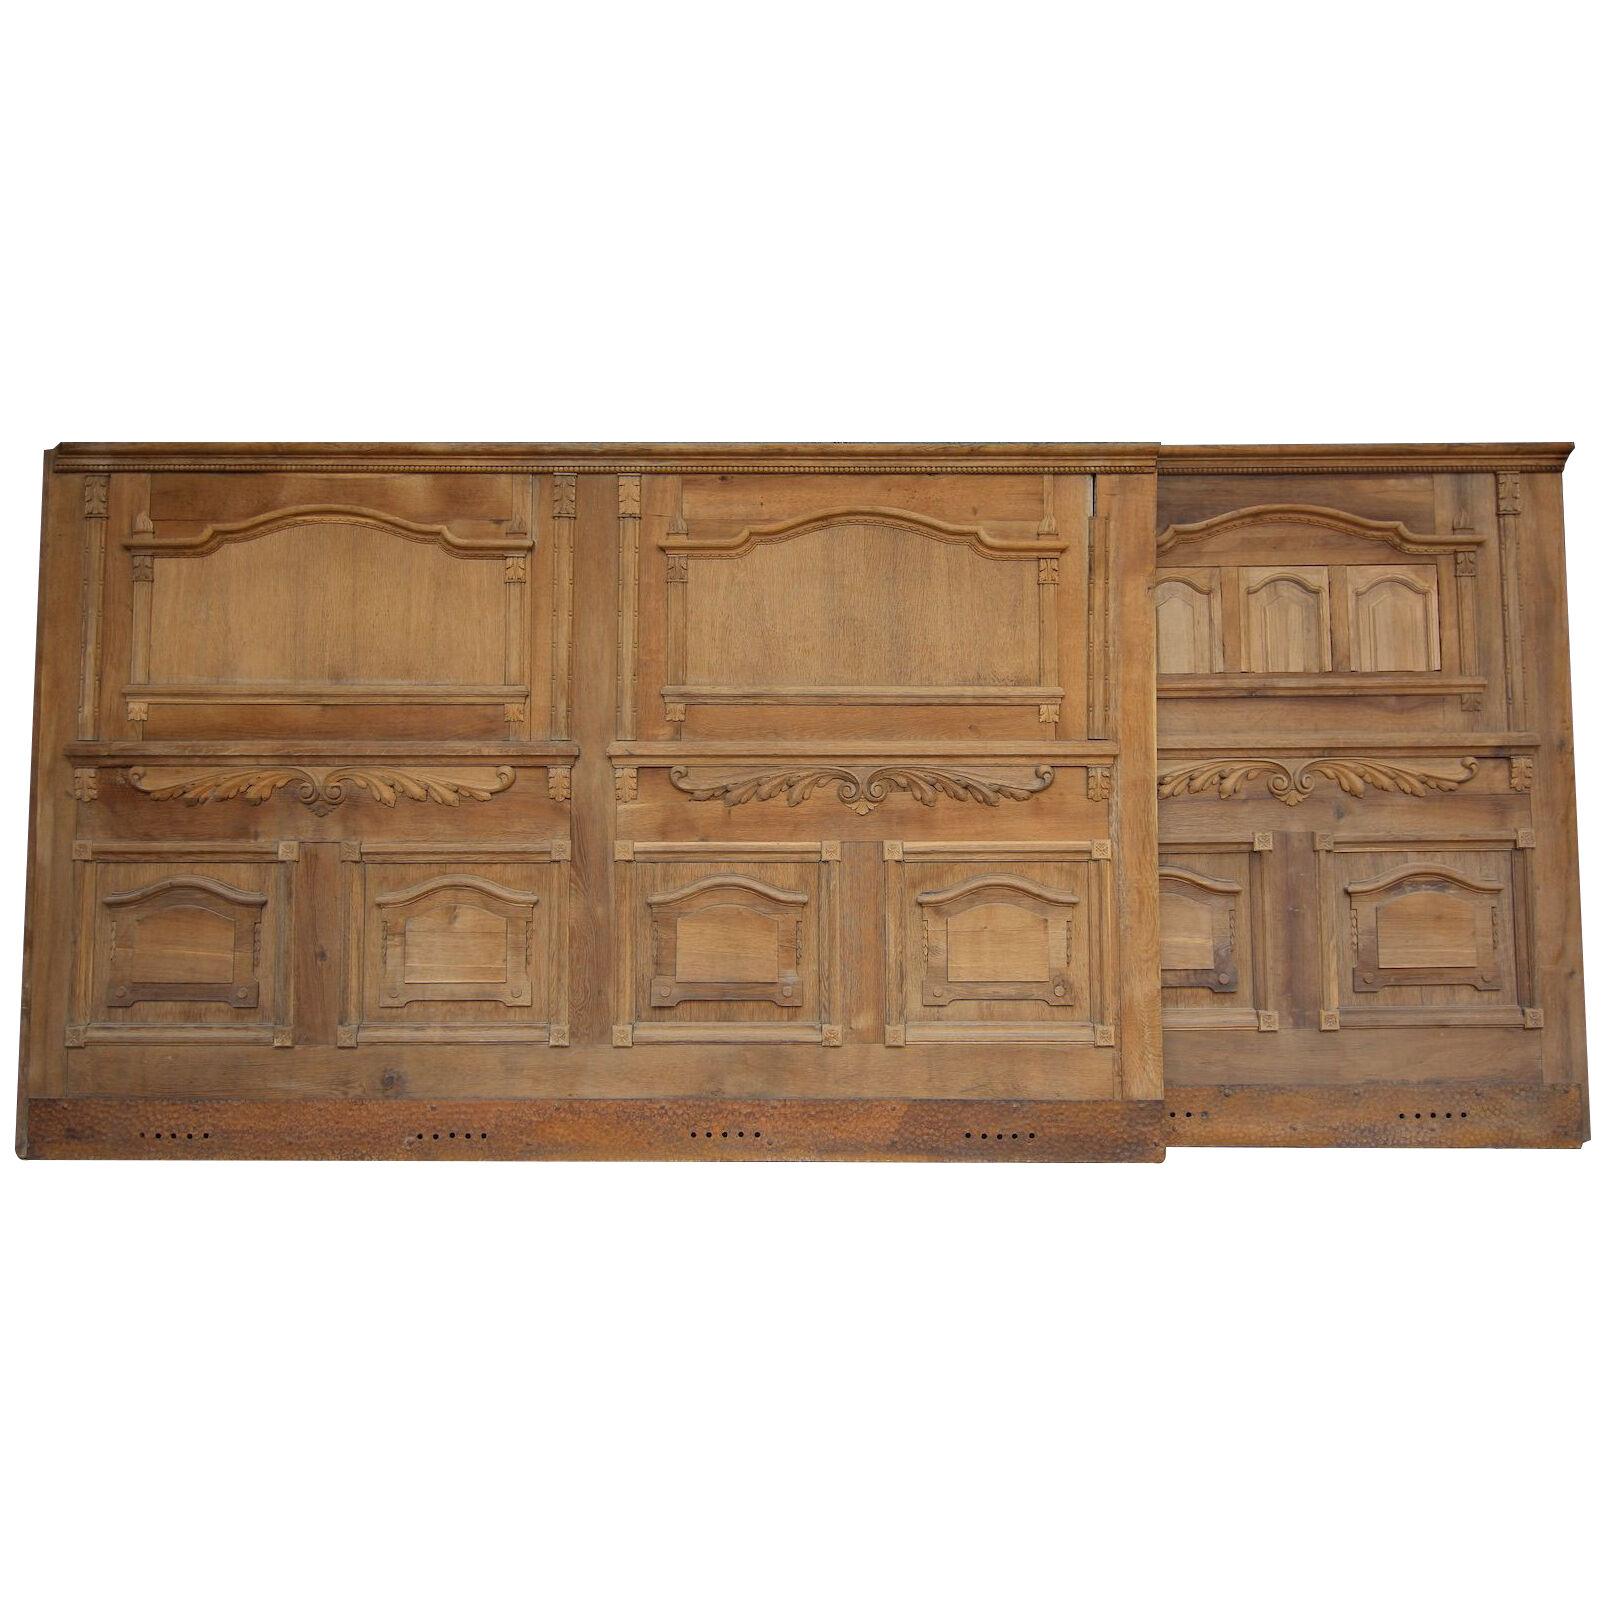 Early 20th Century Stripped Oak Wall Panelling, Set of 2